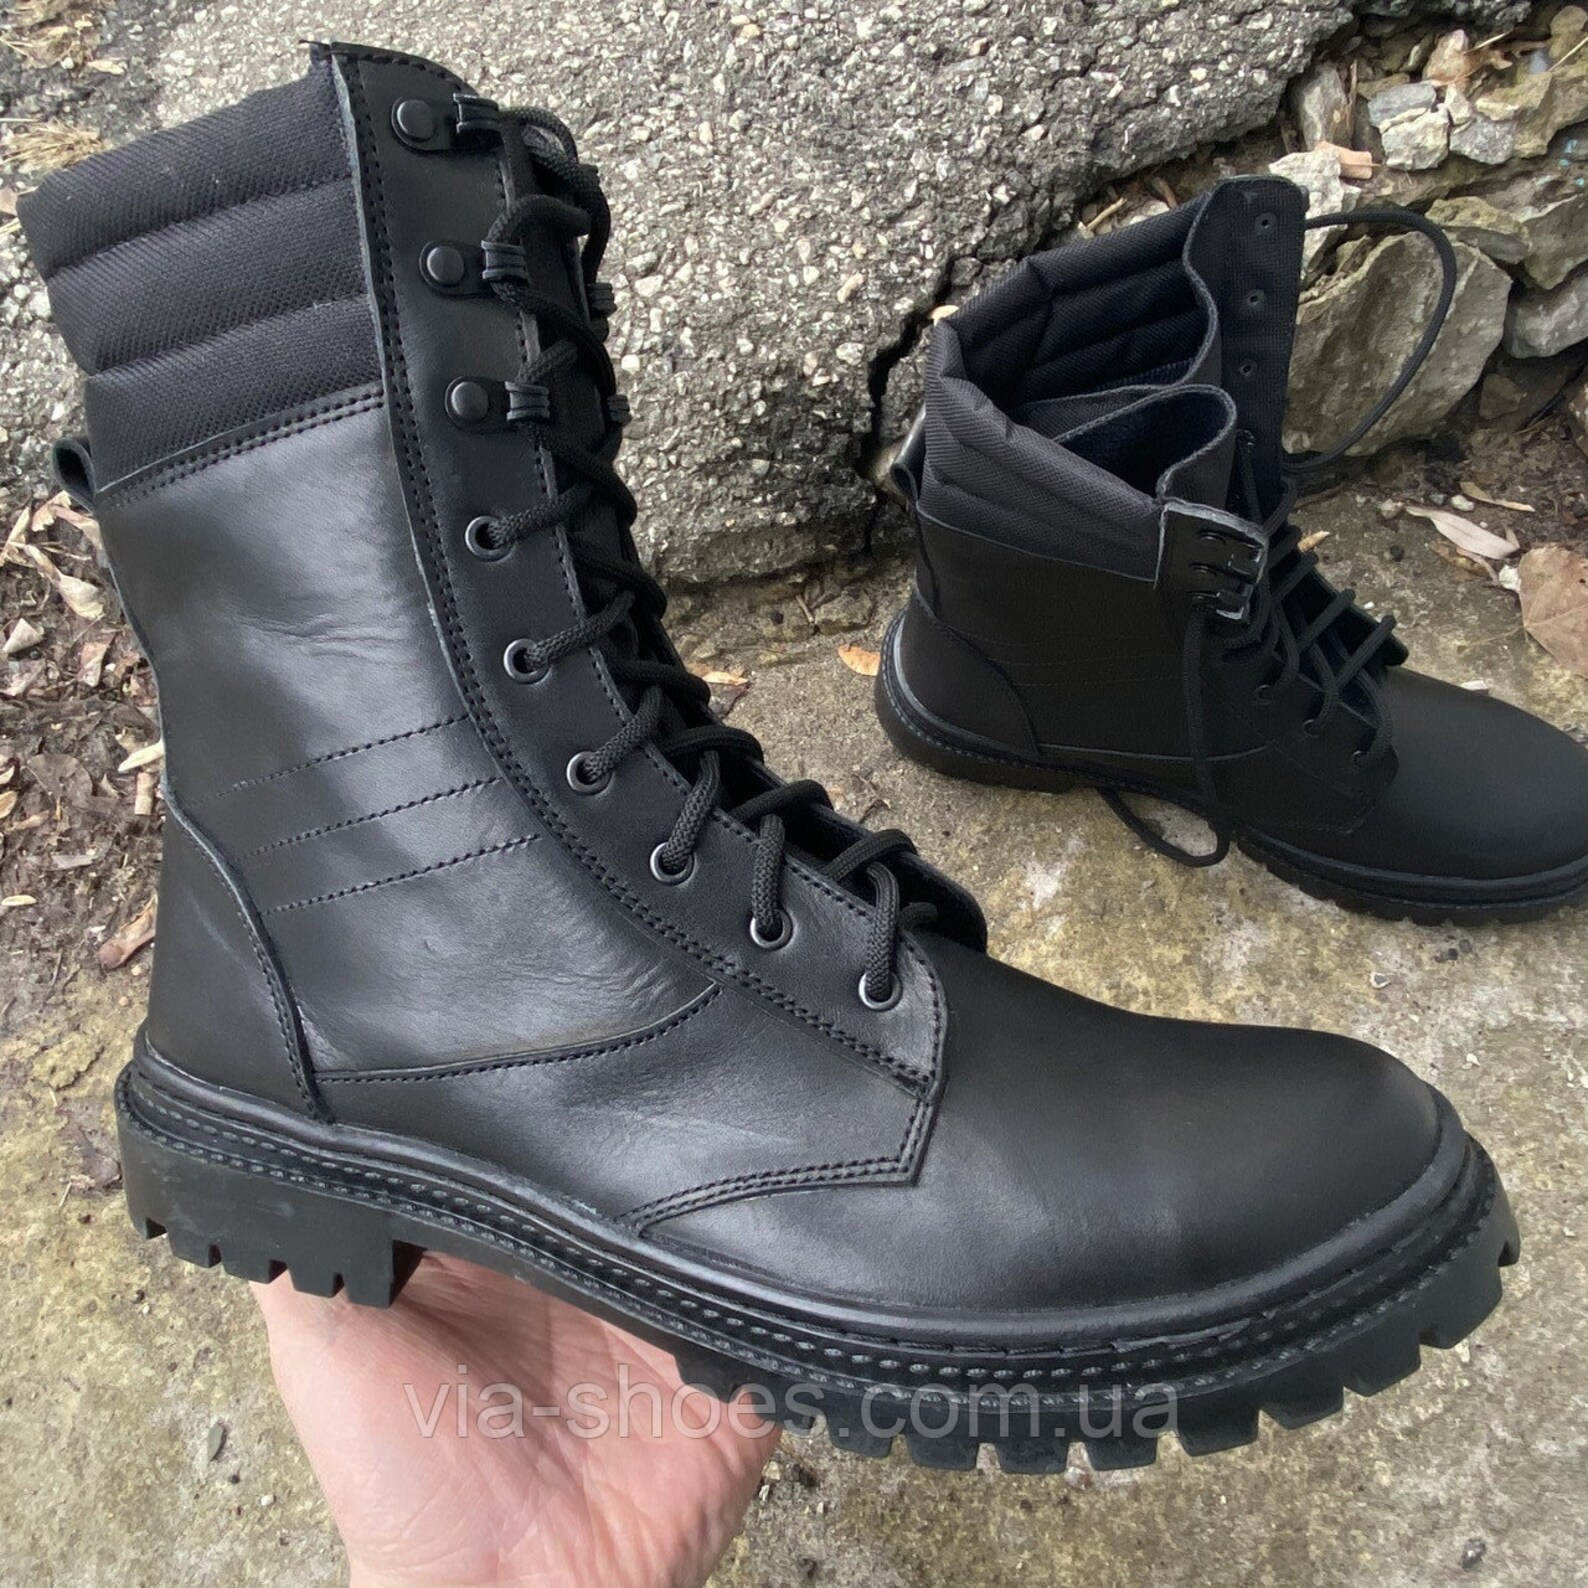 Ukrainian Leather Boots Special Forces Army Boots Military - Etsy Canada